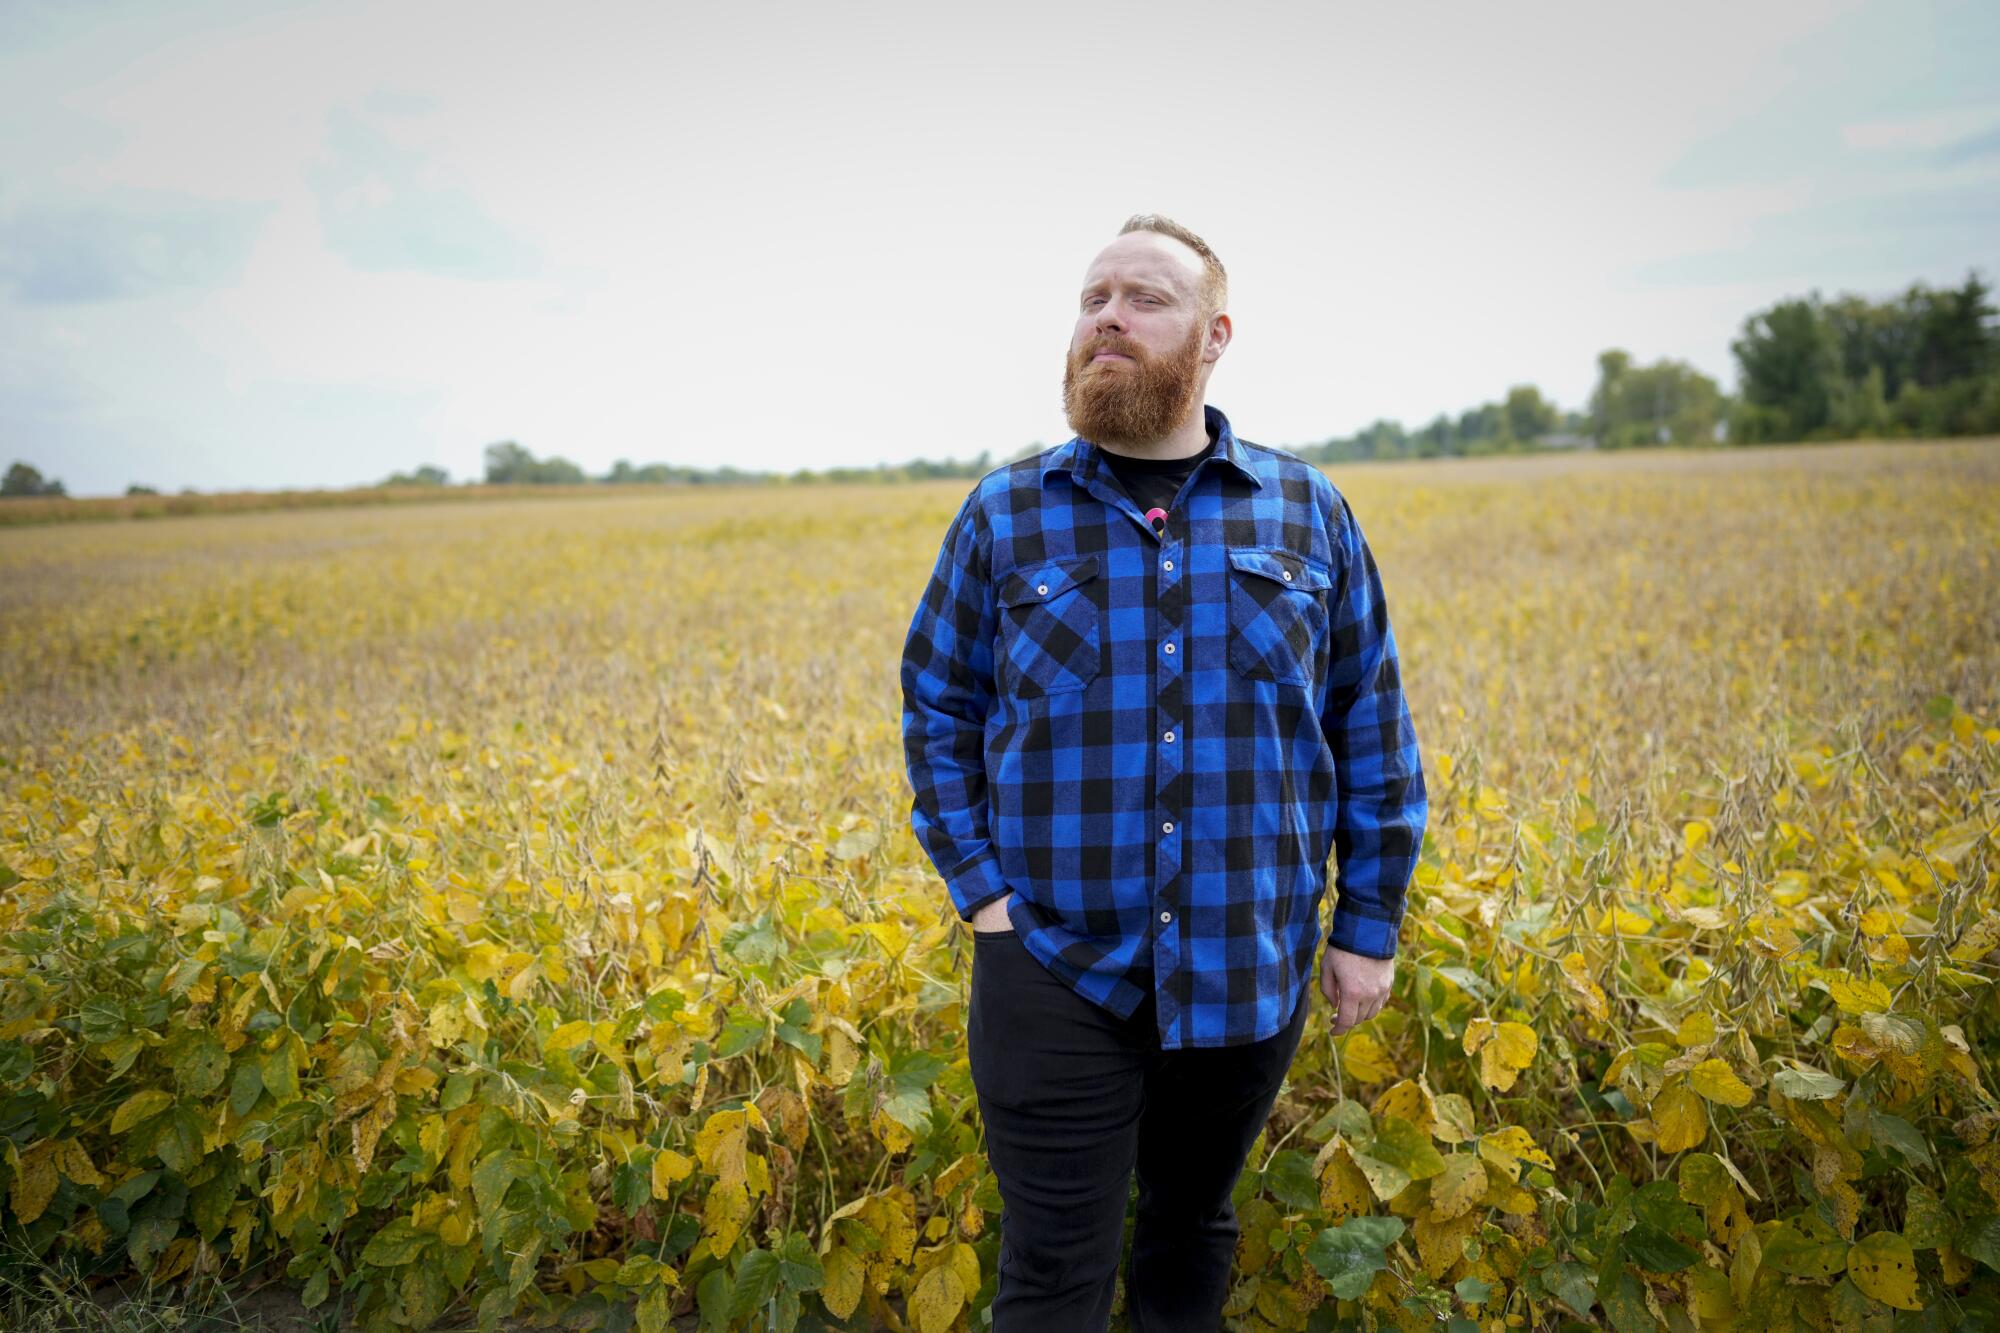 Brent Terhune poses for a portrait in a field near his home in Indiana.